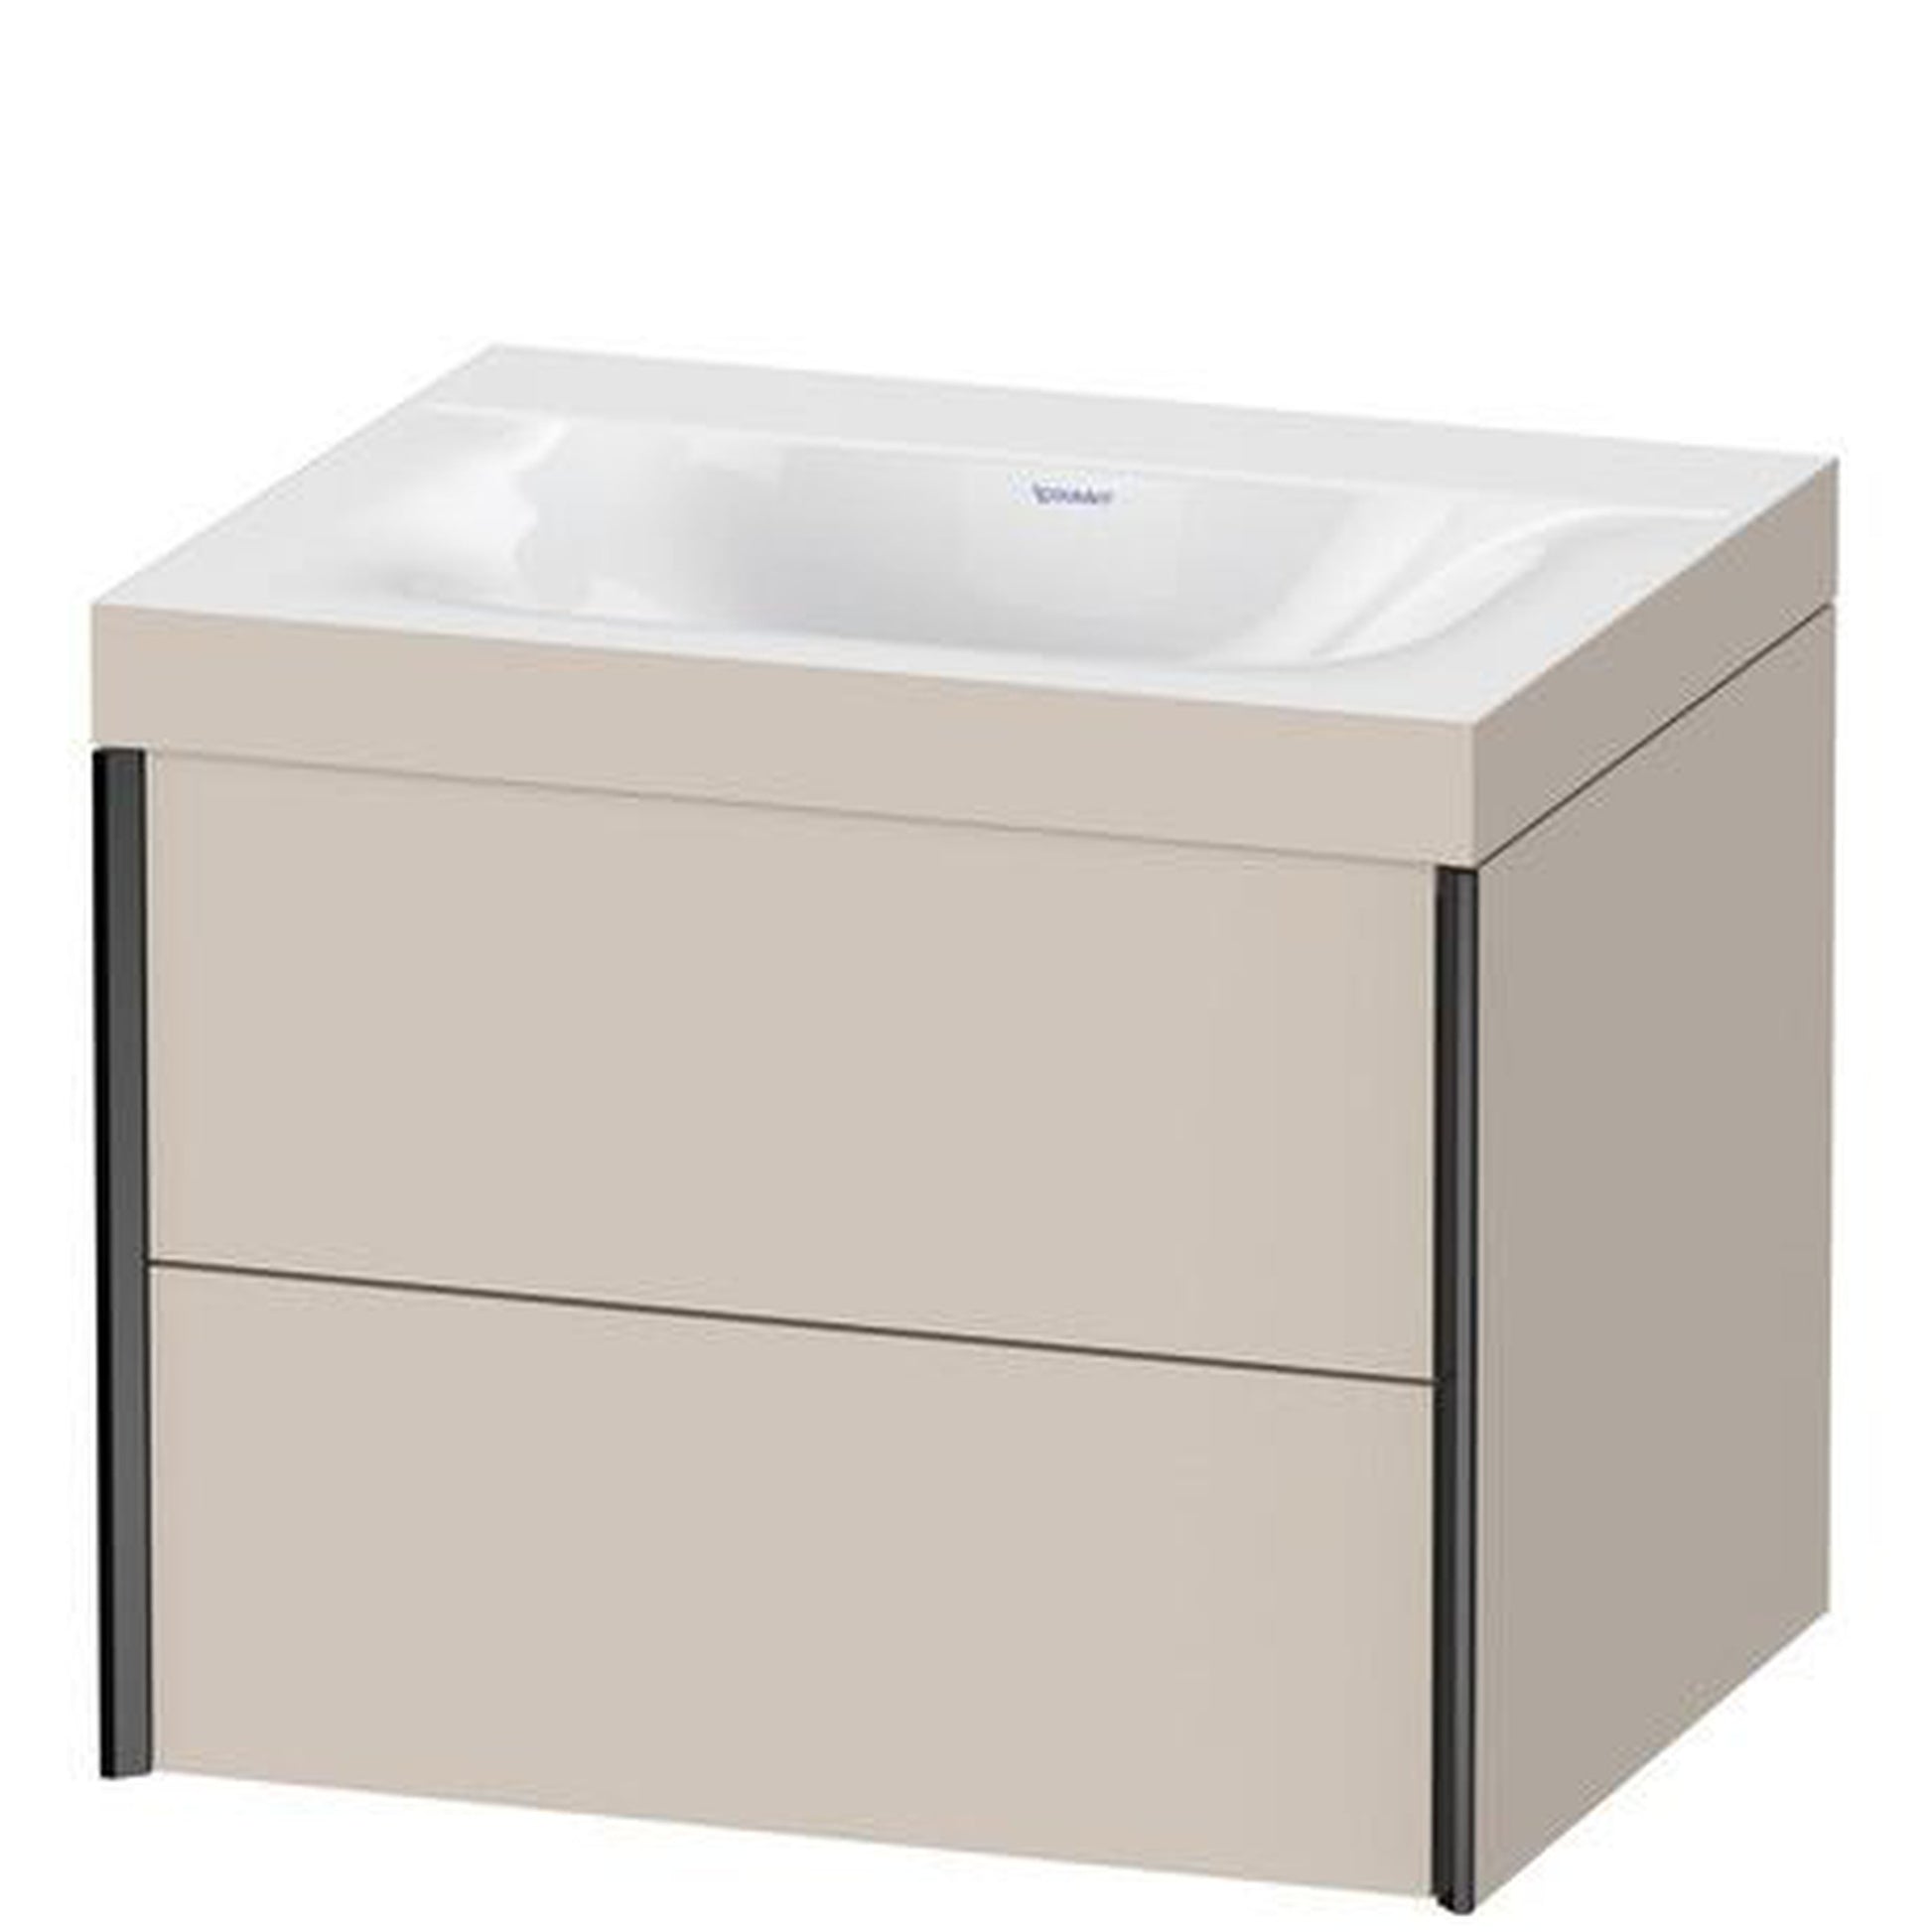 Duravit Xviu 24" x 20" x 19" Two Drawer C-Bonded Wall-Mount Vanity Kit Without Tap Hole, Taupe (XV4614NB291C)